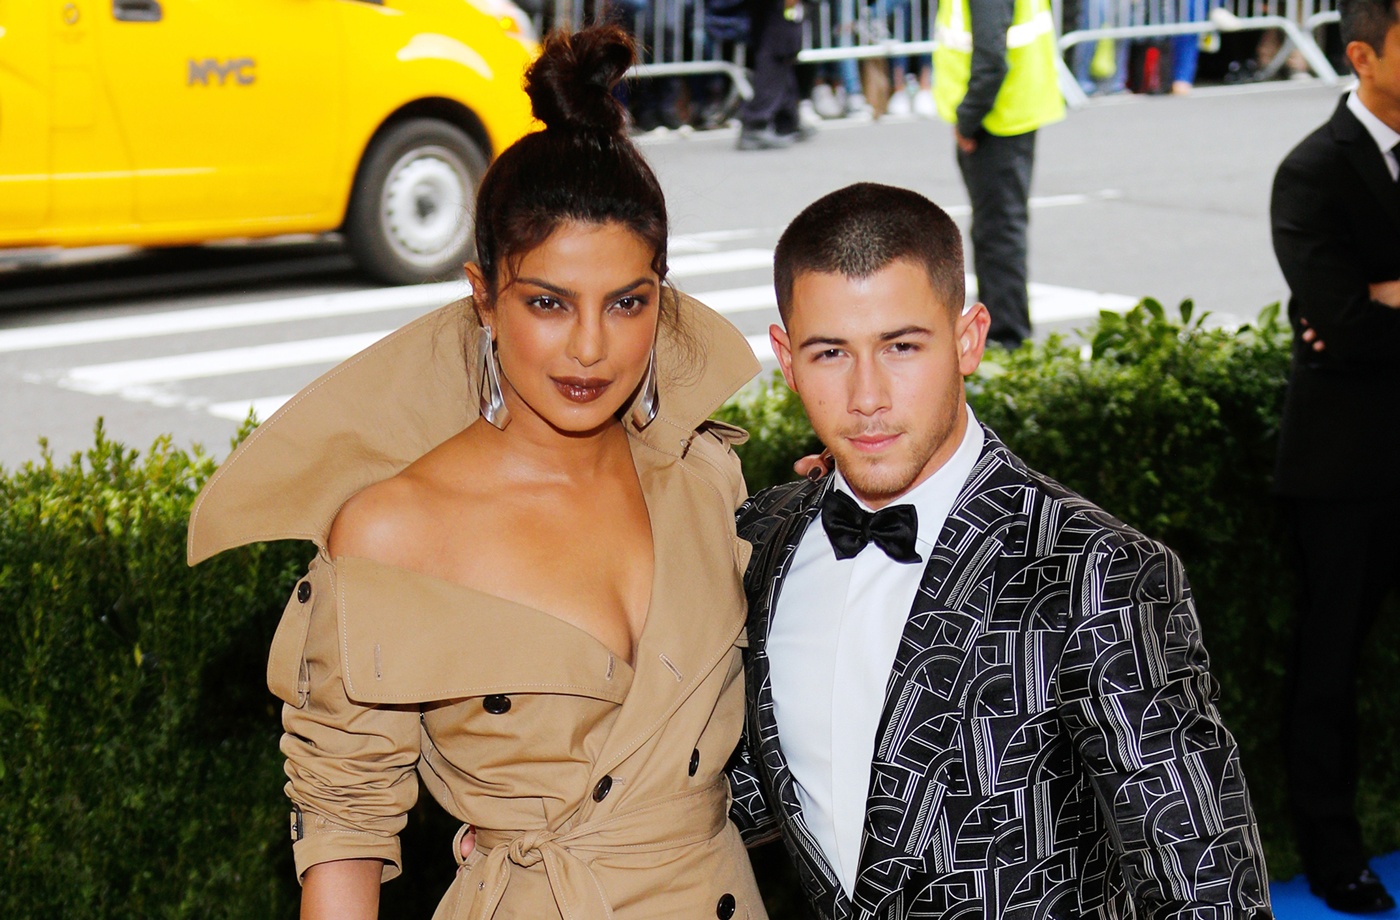 Nick Jonas engaged fast? Yes, other celebs too